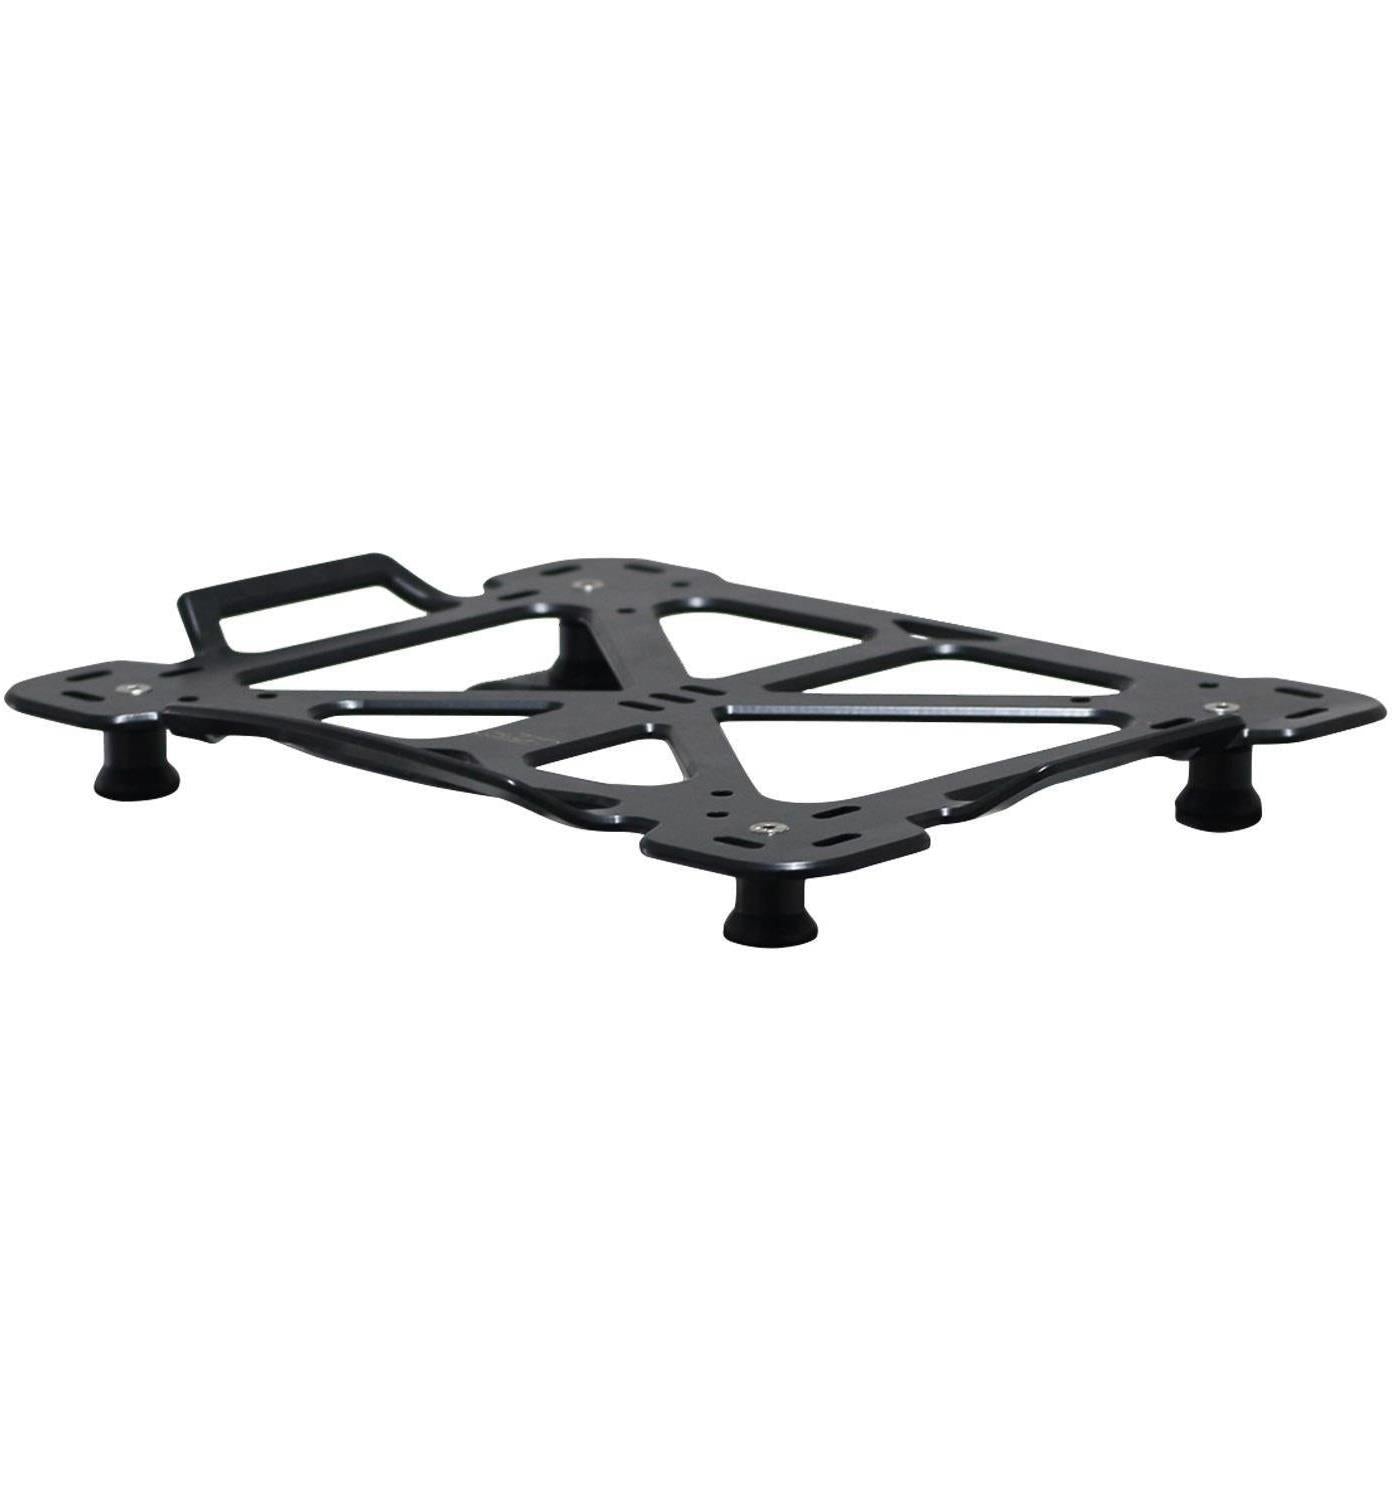 Motorcycle metal top box rack luggage rack extra carrier shelf for top case - Equipment4motorcycle